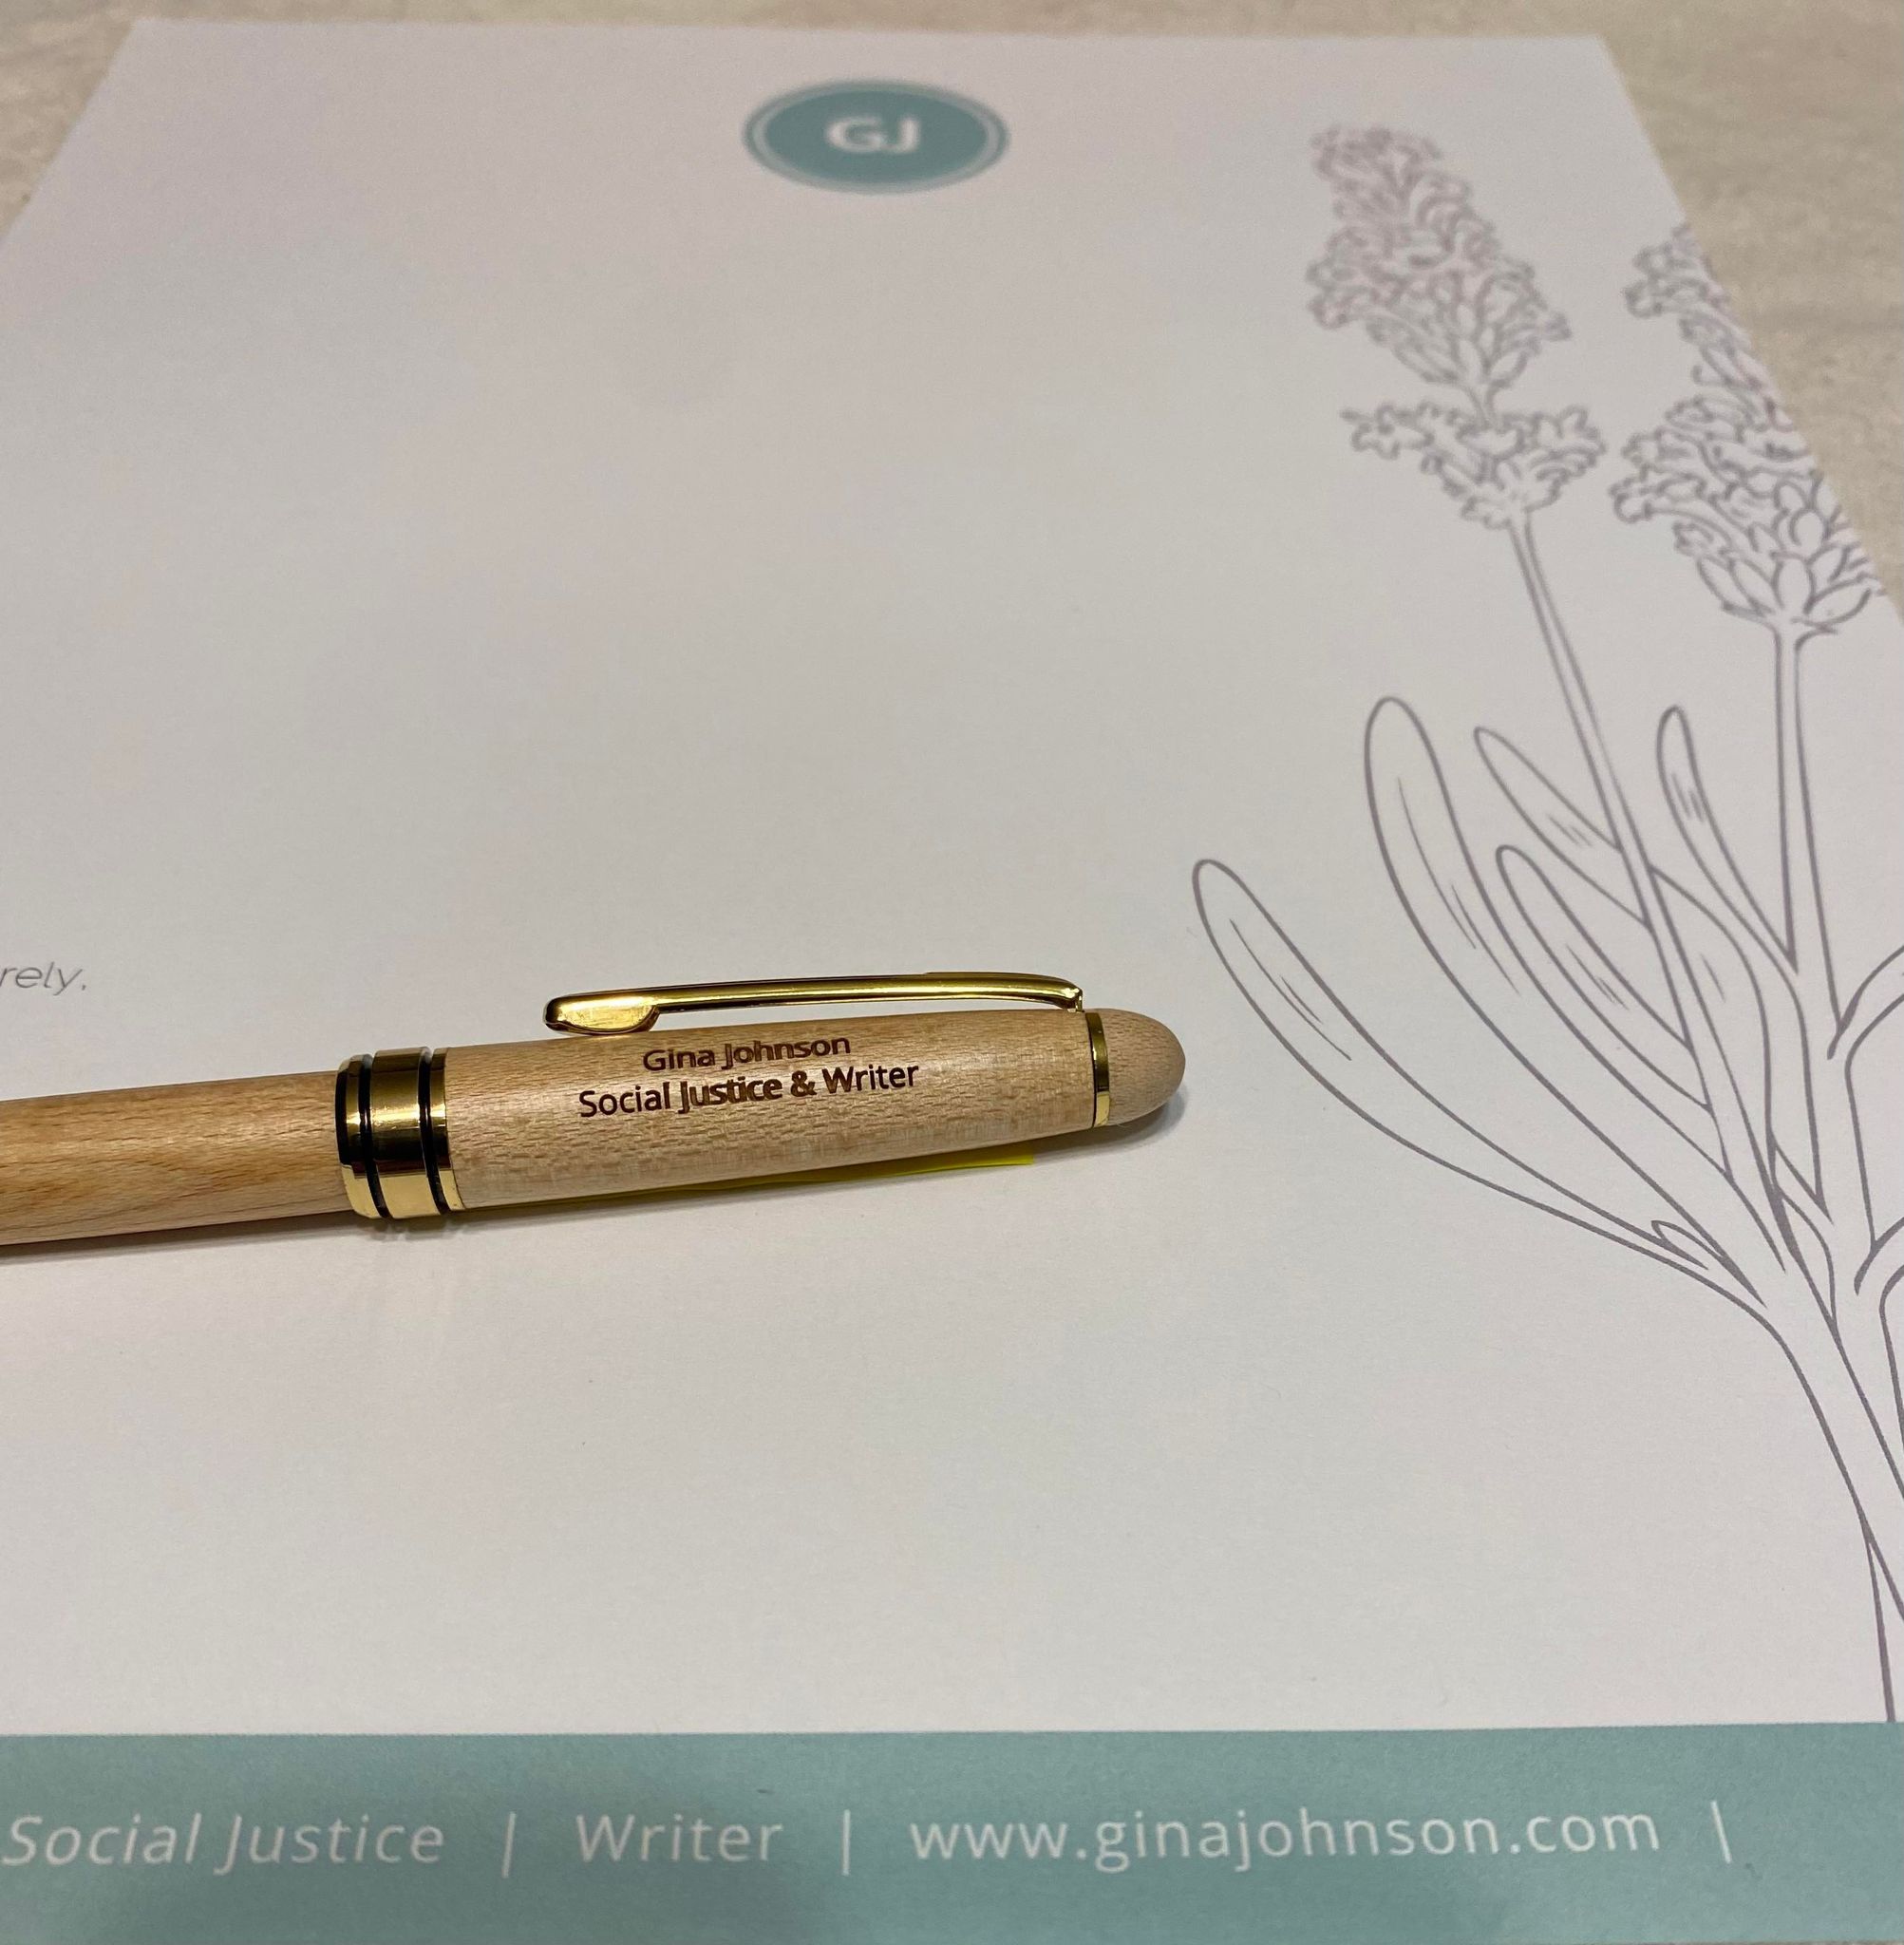 A picture of a pen and stationary